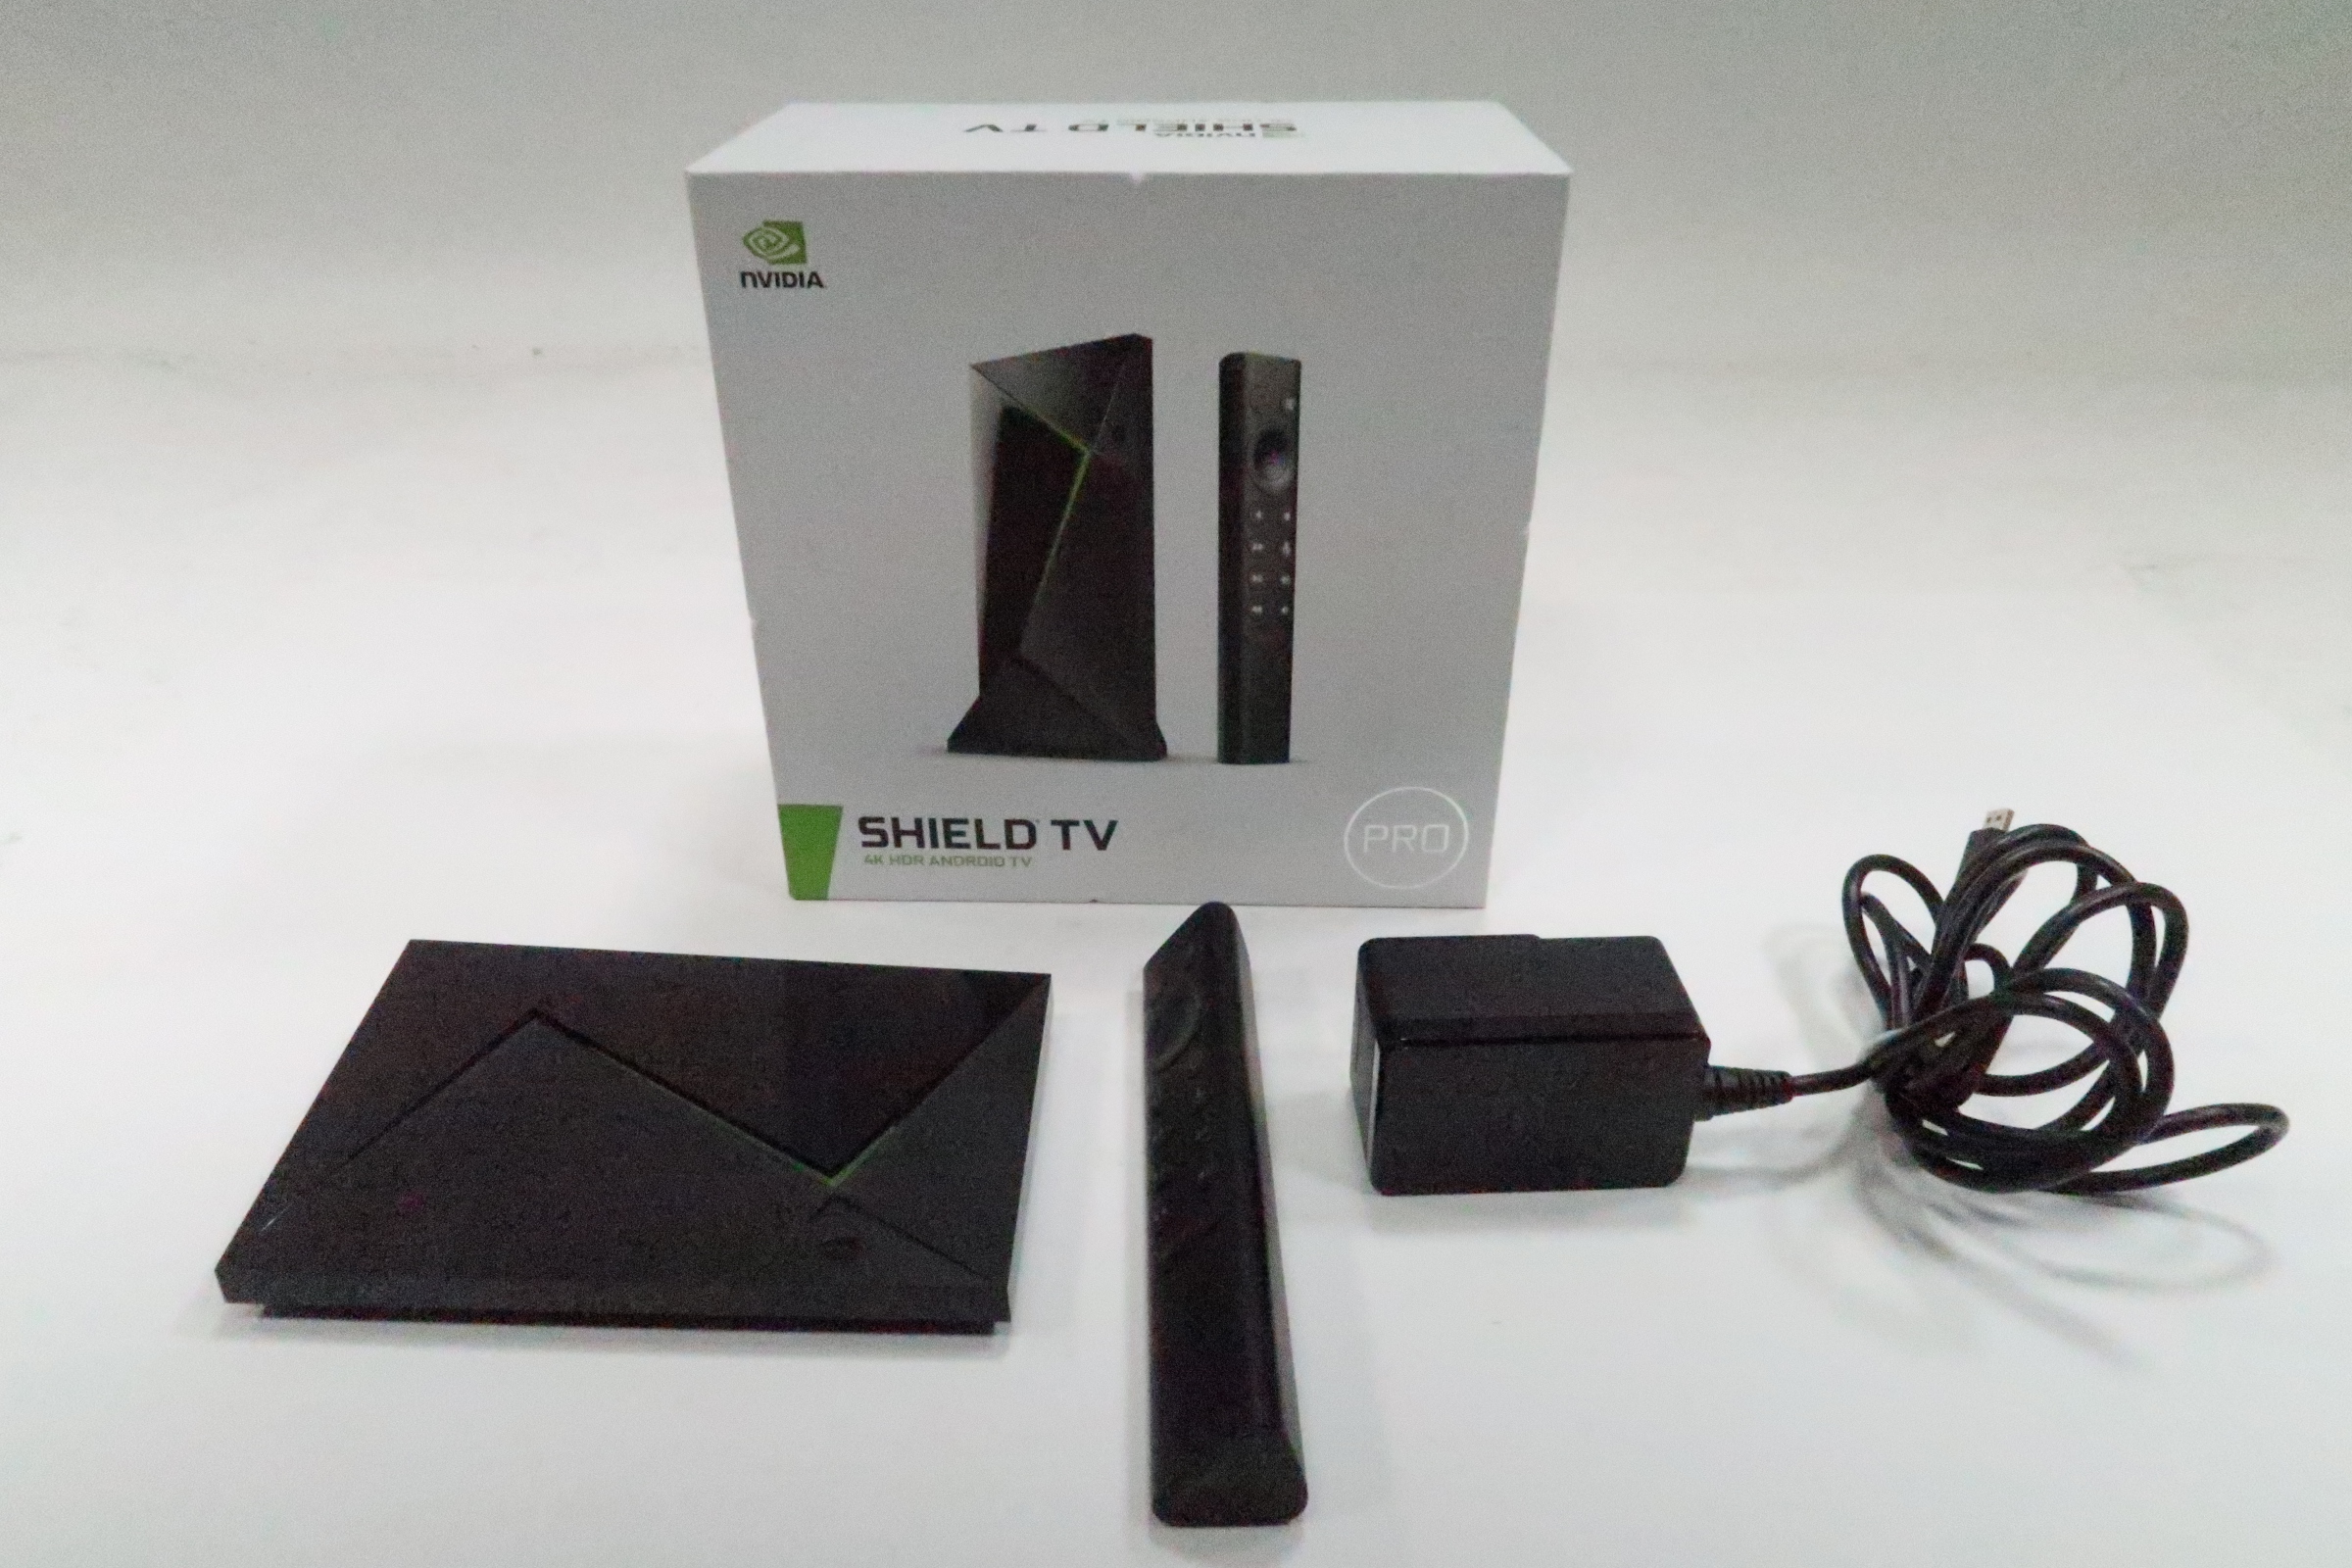 Nvidia Shield TV Pro Streaming Media Player Reviewed - My Site